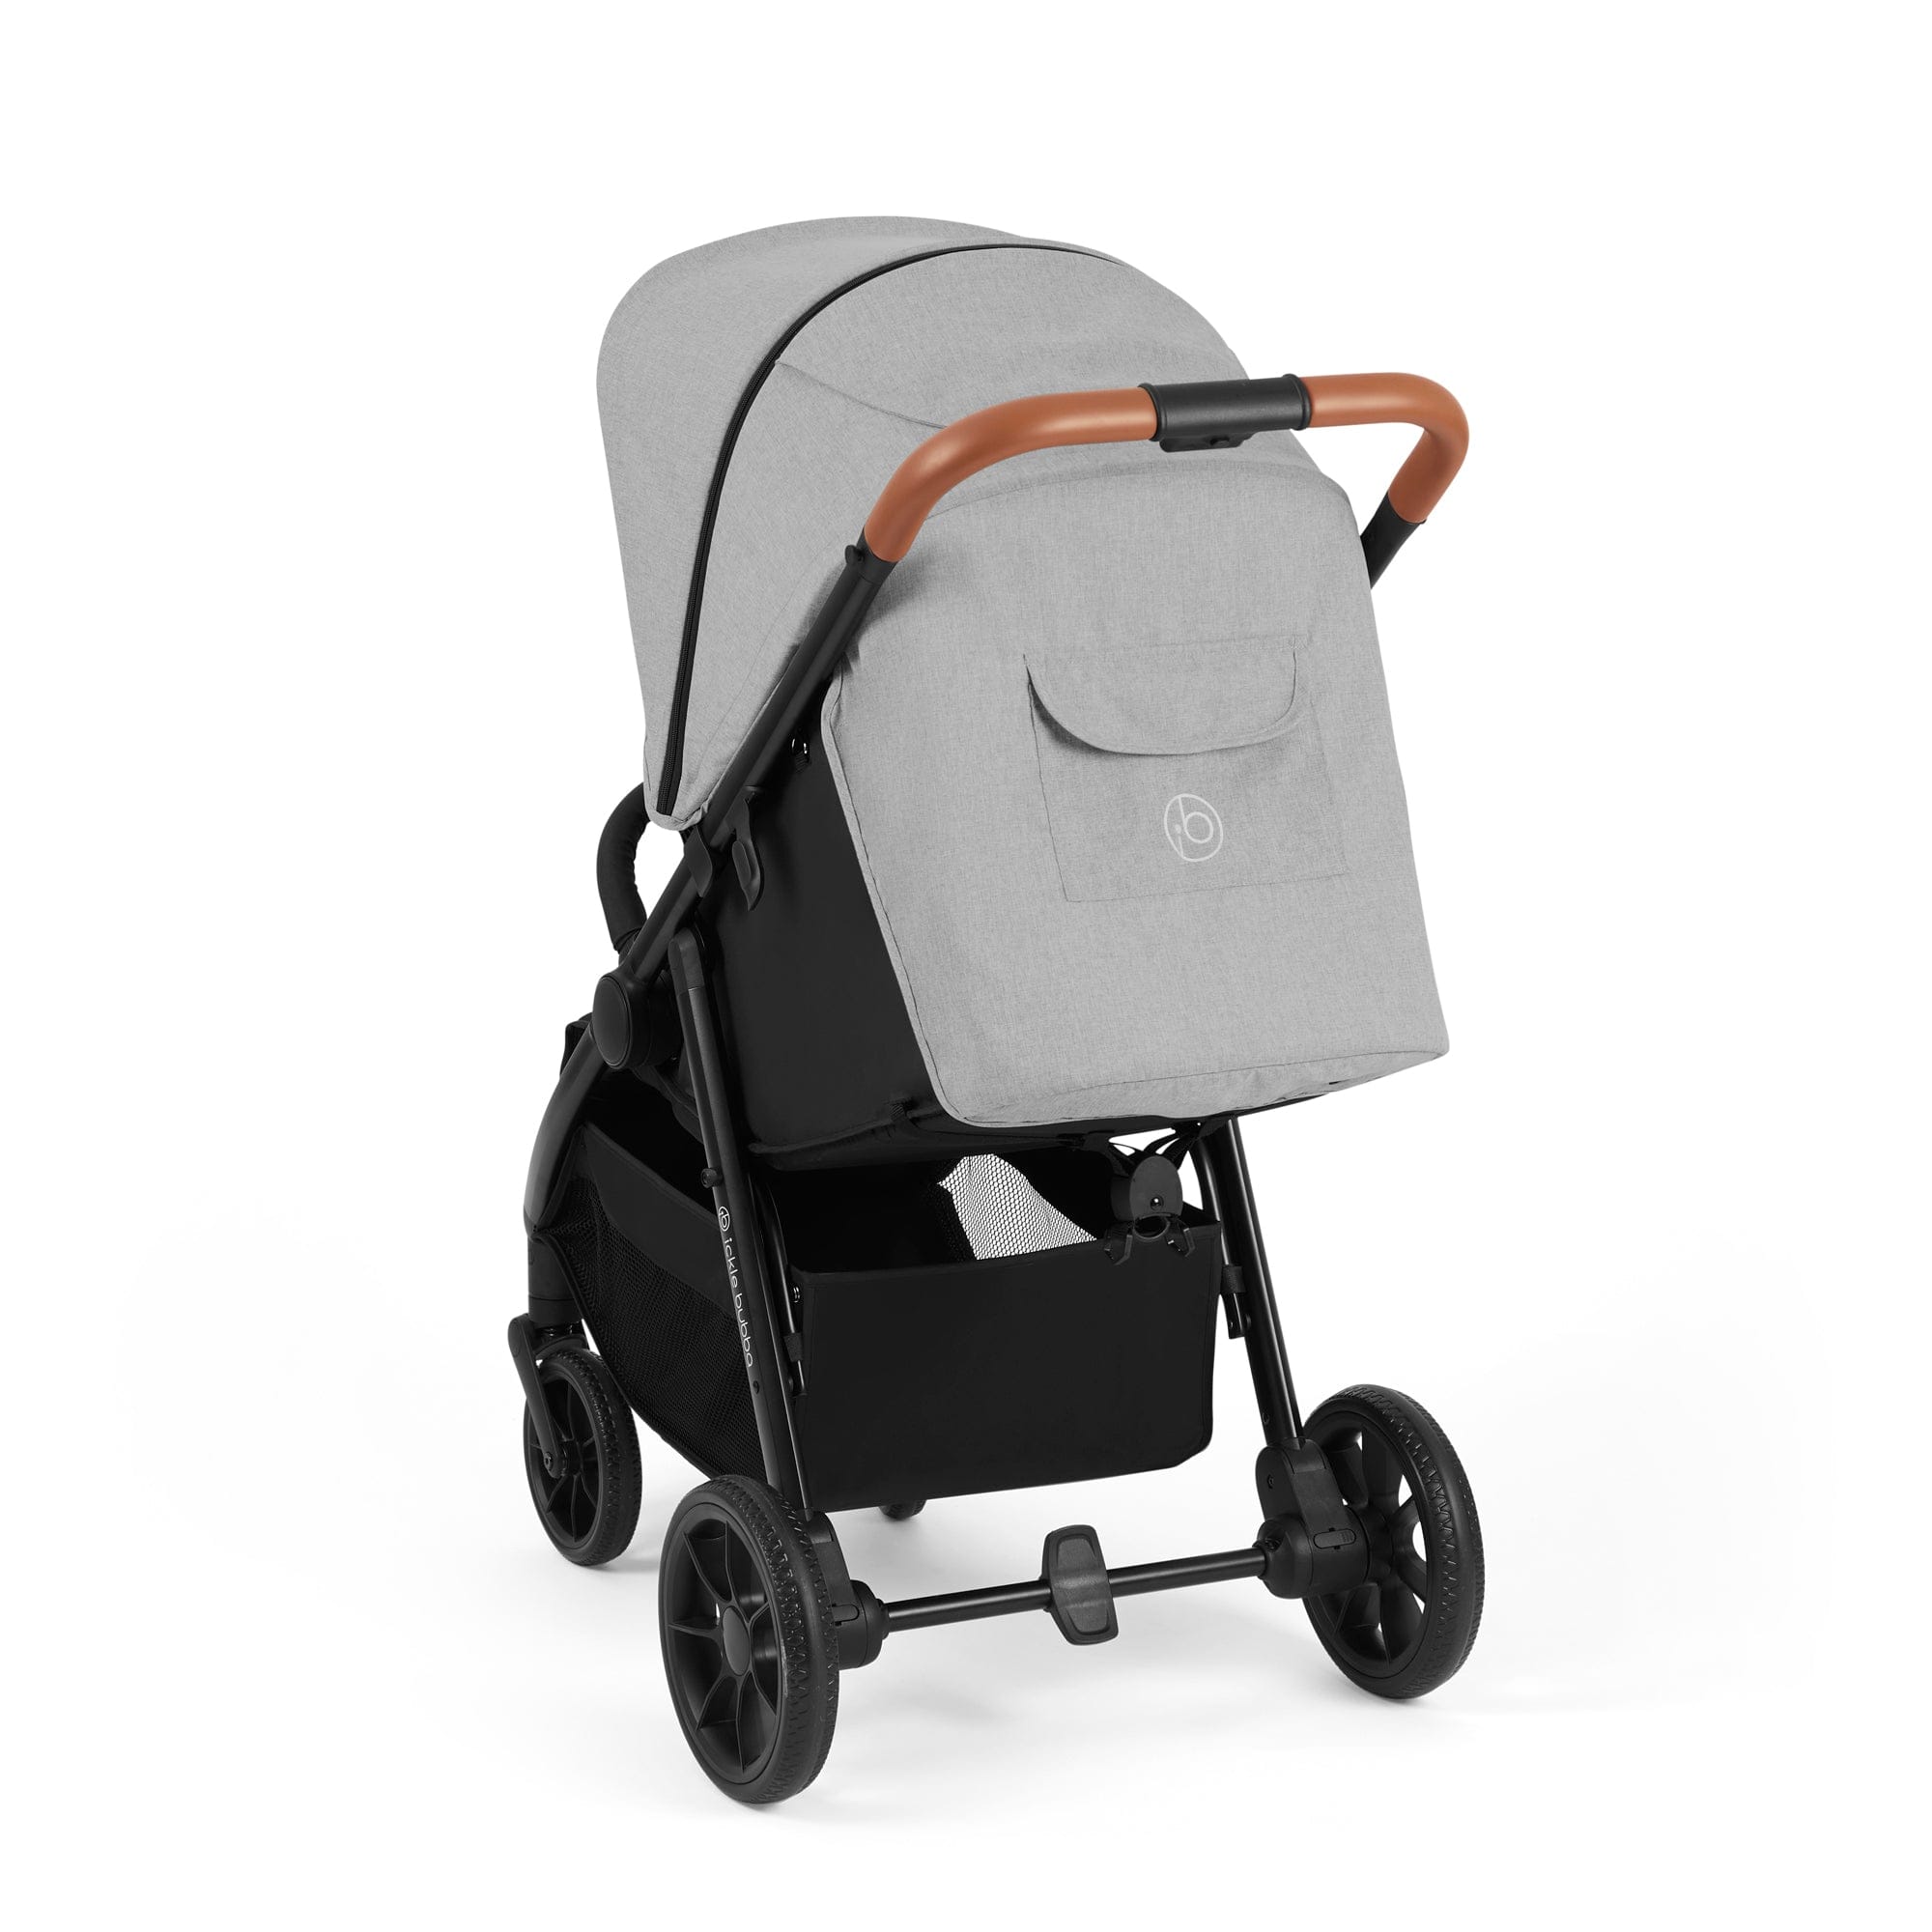 STOMP STRIDE MAX STROLLER in Pearl Grey Pushchairs & Buggies 15-006-200-147 5056515033885